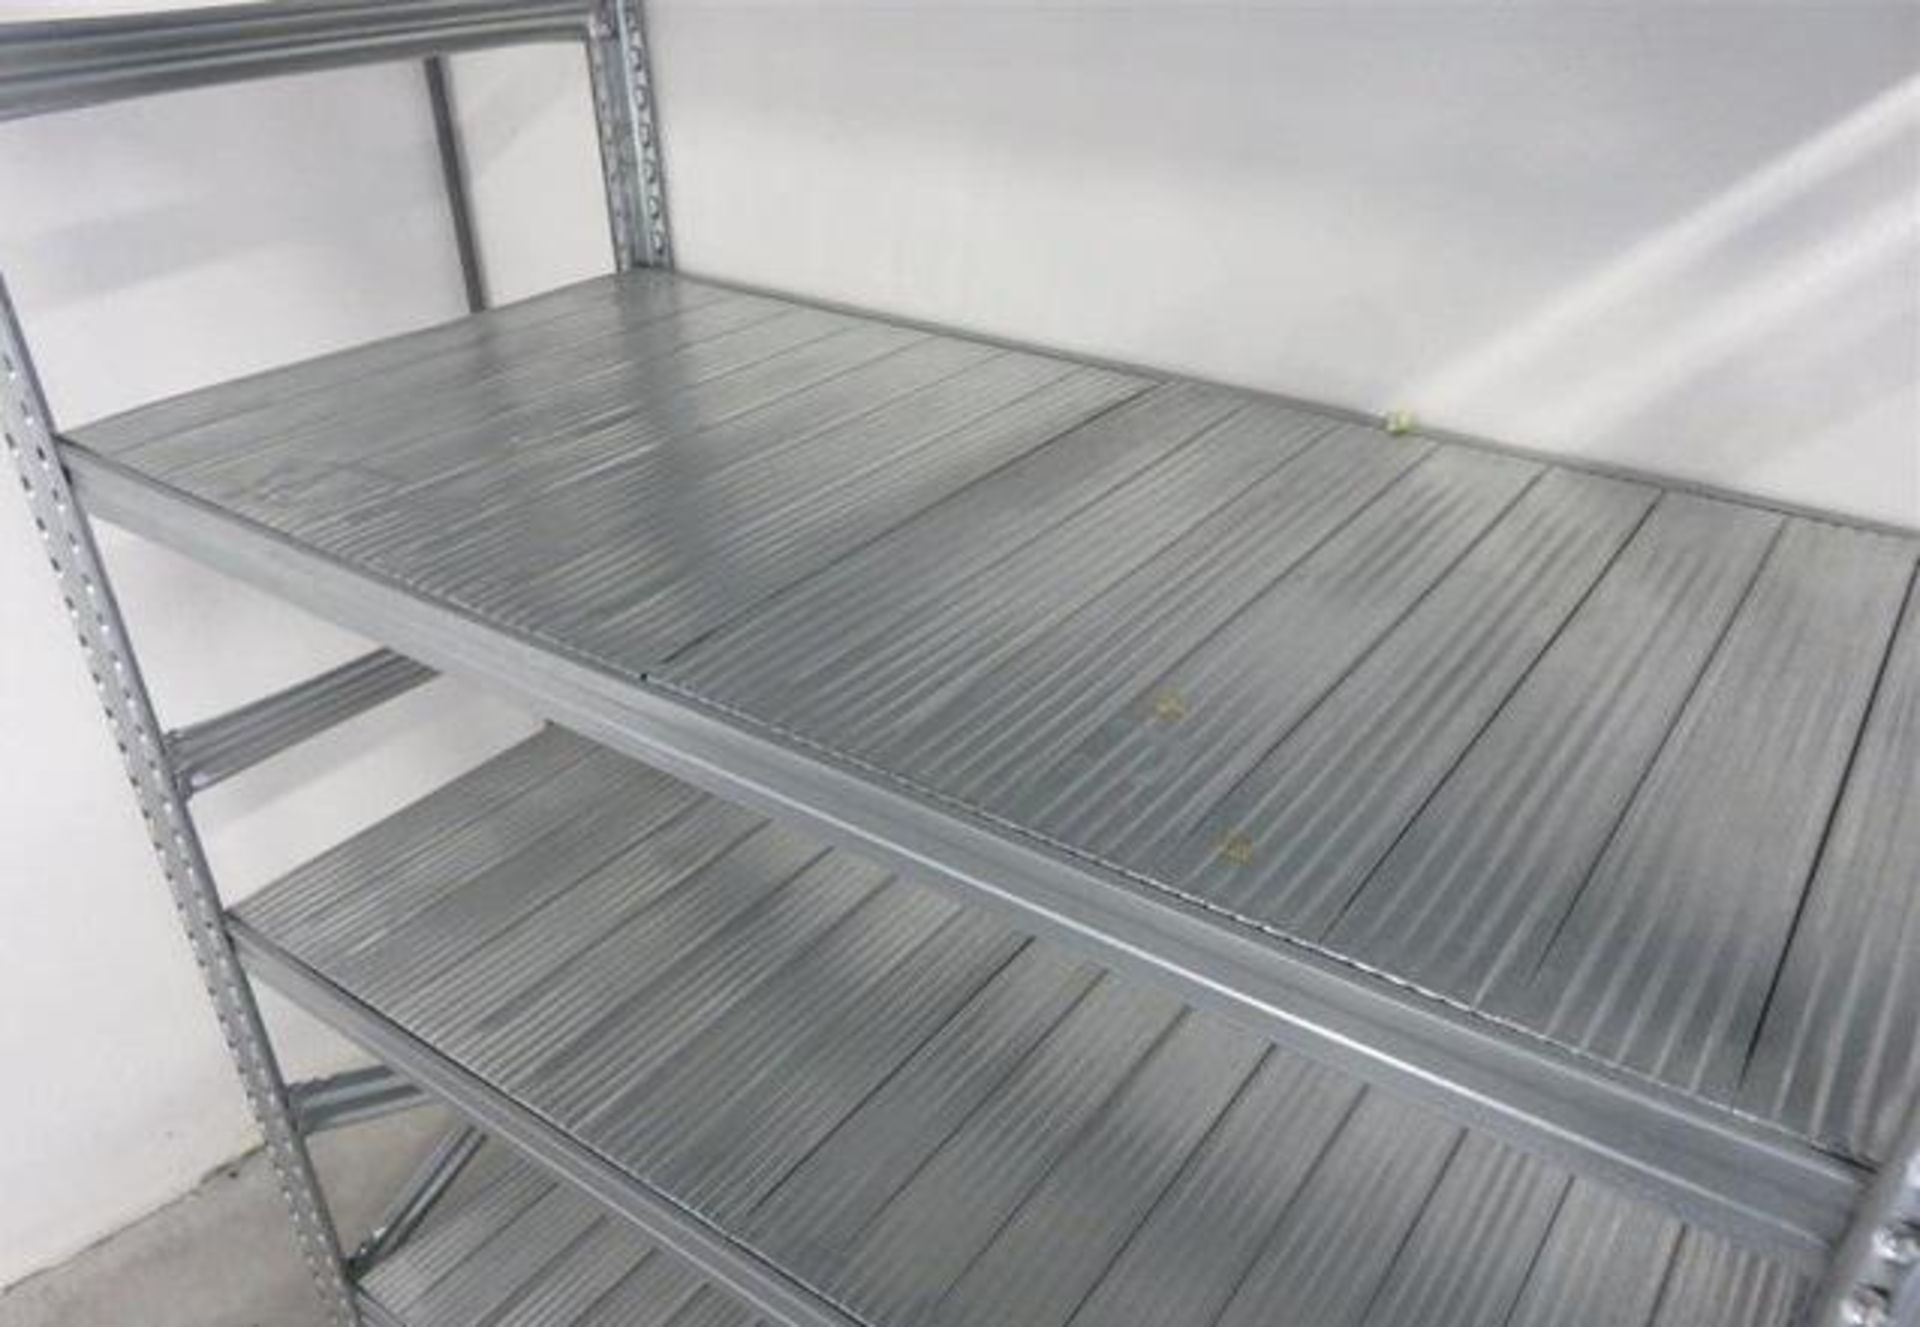 4 x Bays of Metalsistem Steel Modular Storage Shelving - Includes 37 Pieces - Recently Removed - Image 12 of 17